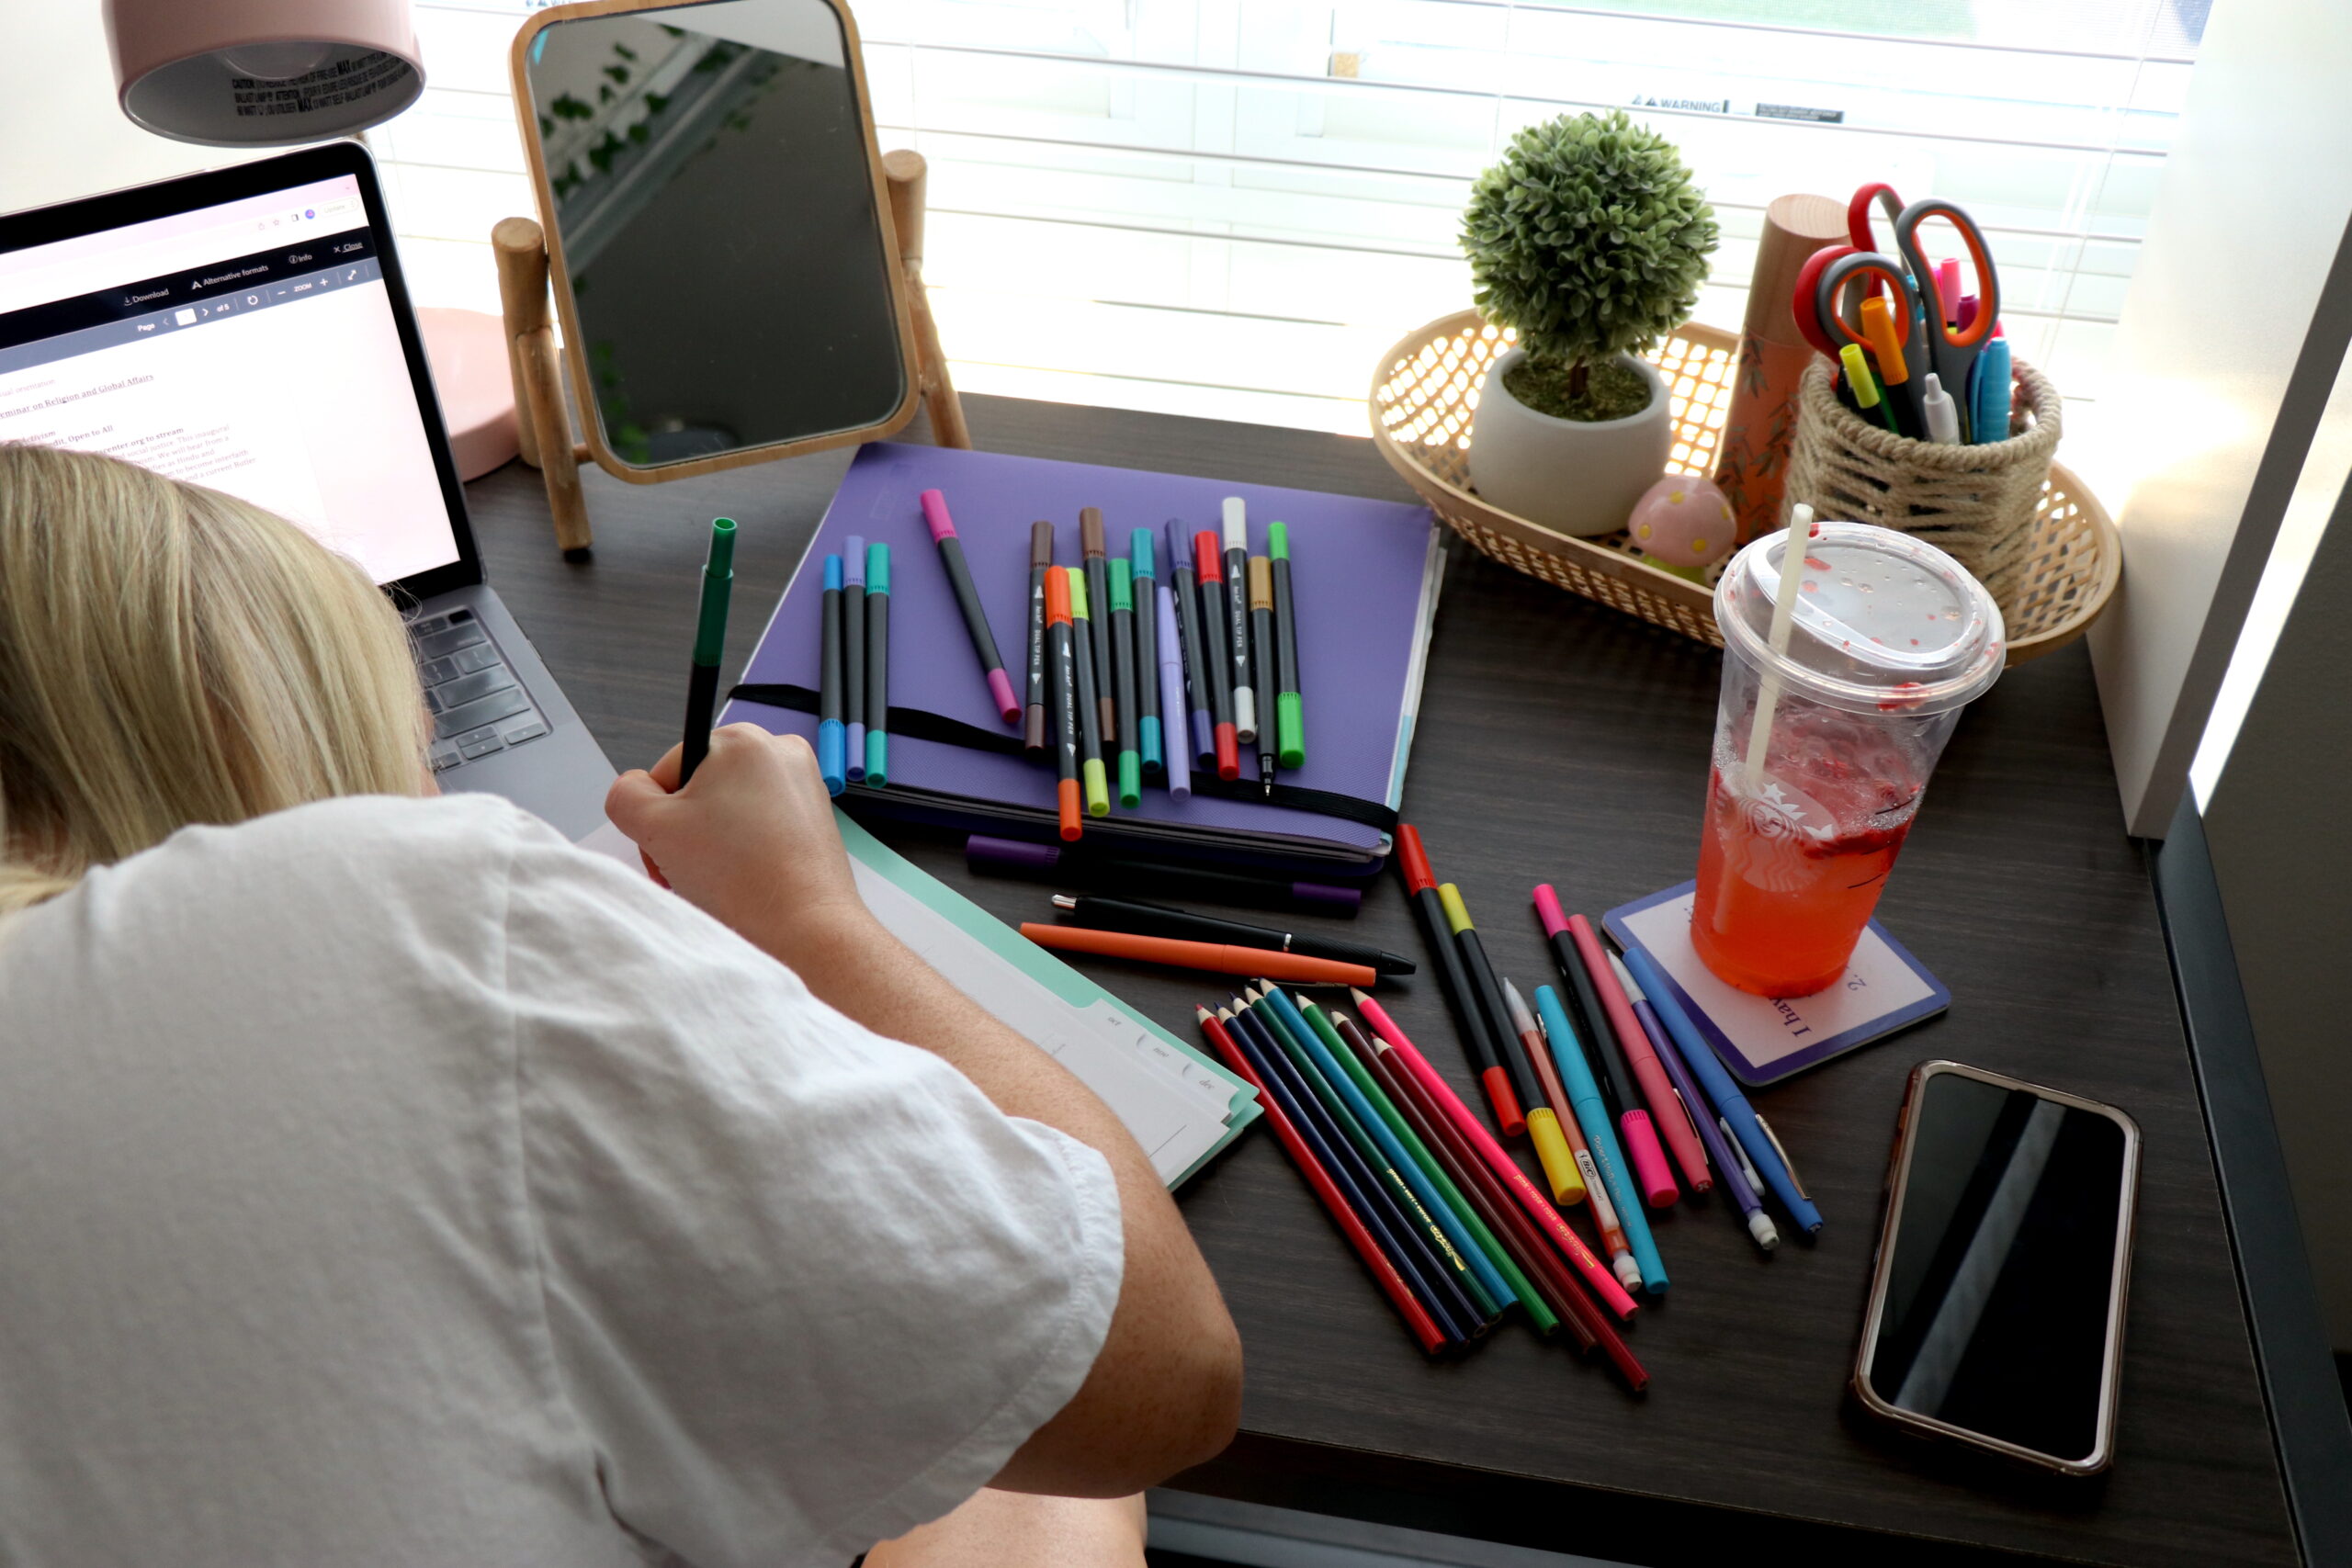 An artist's desk is in view as she works, with color pencils scattered amongst it.